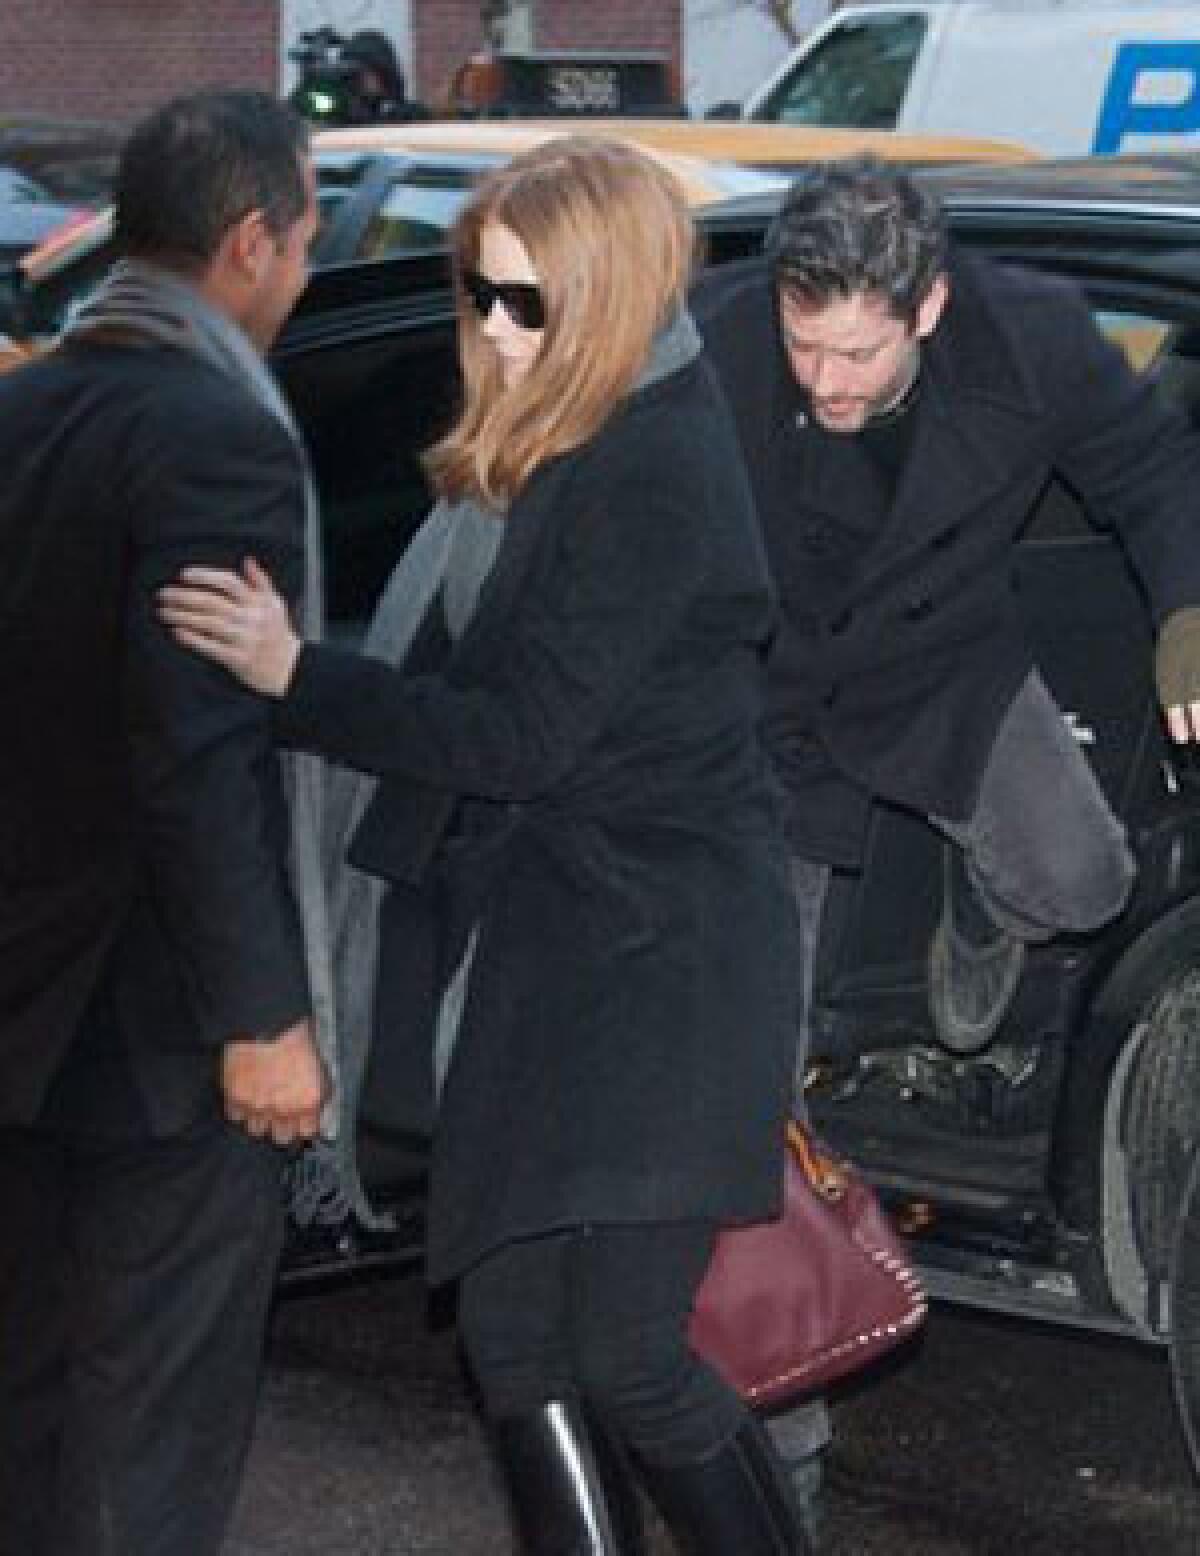 Amy Adams attends a service for actor Philip Seymour Hoffman at the Frank E. Campbell Funeral Chapel in New York.